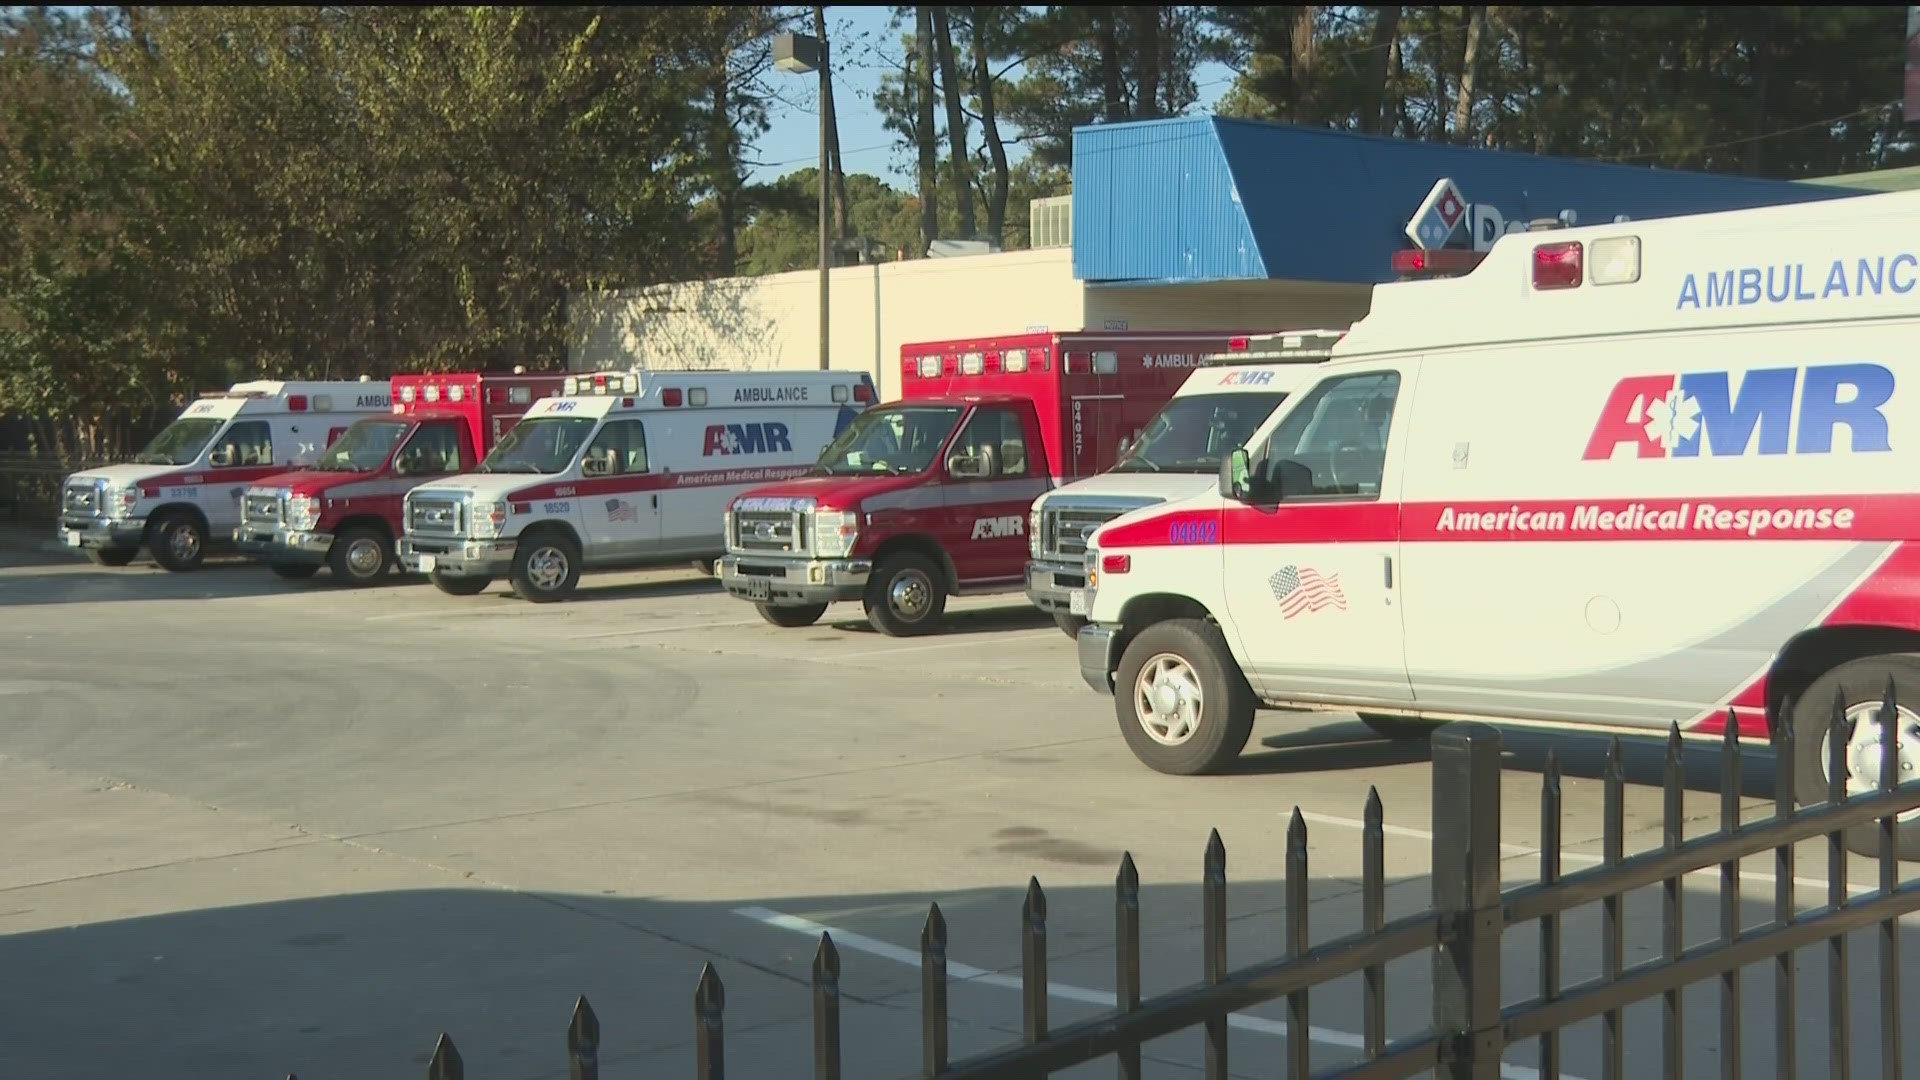 11Alive has chronicled the slow EMS response times in DeKalb County.